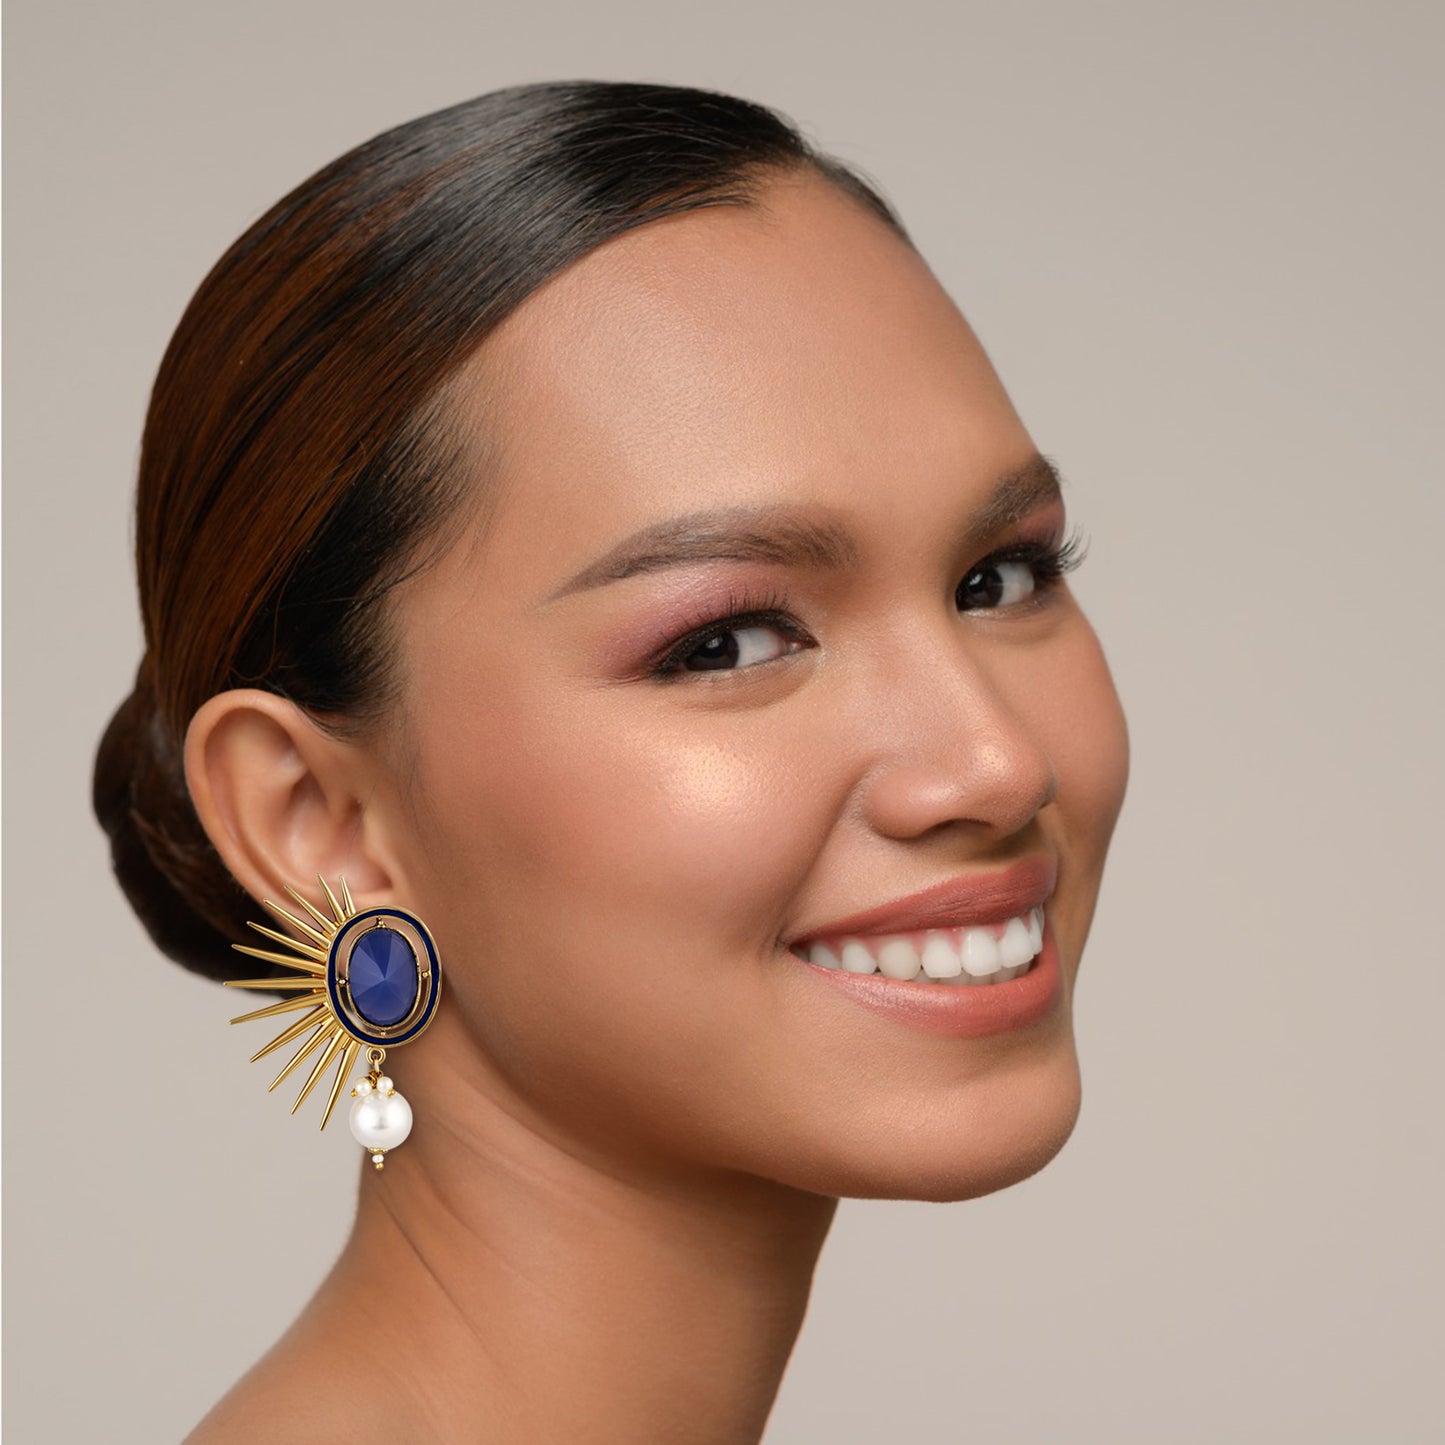 Bdiva 18K Gold Plated Blue Sapphire Earrings With A Pearl Drop.